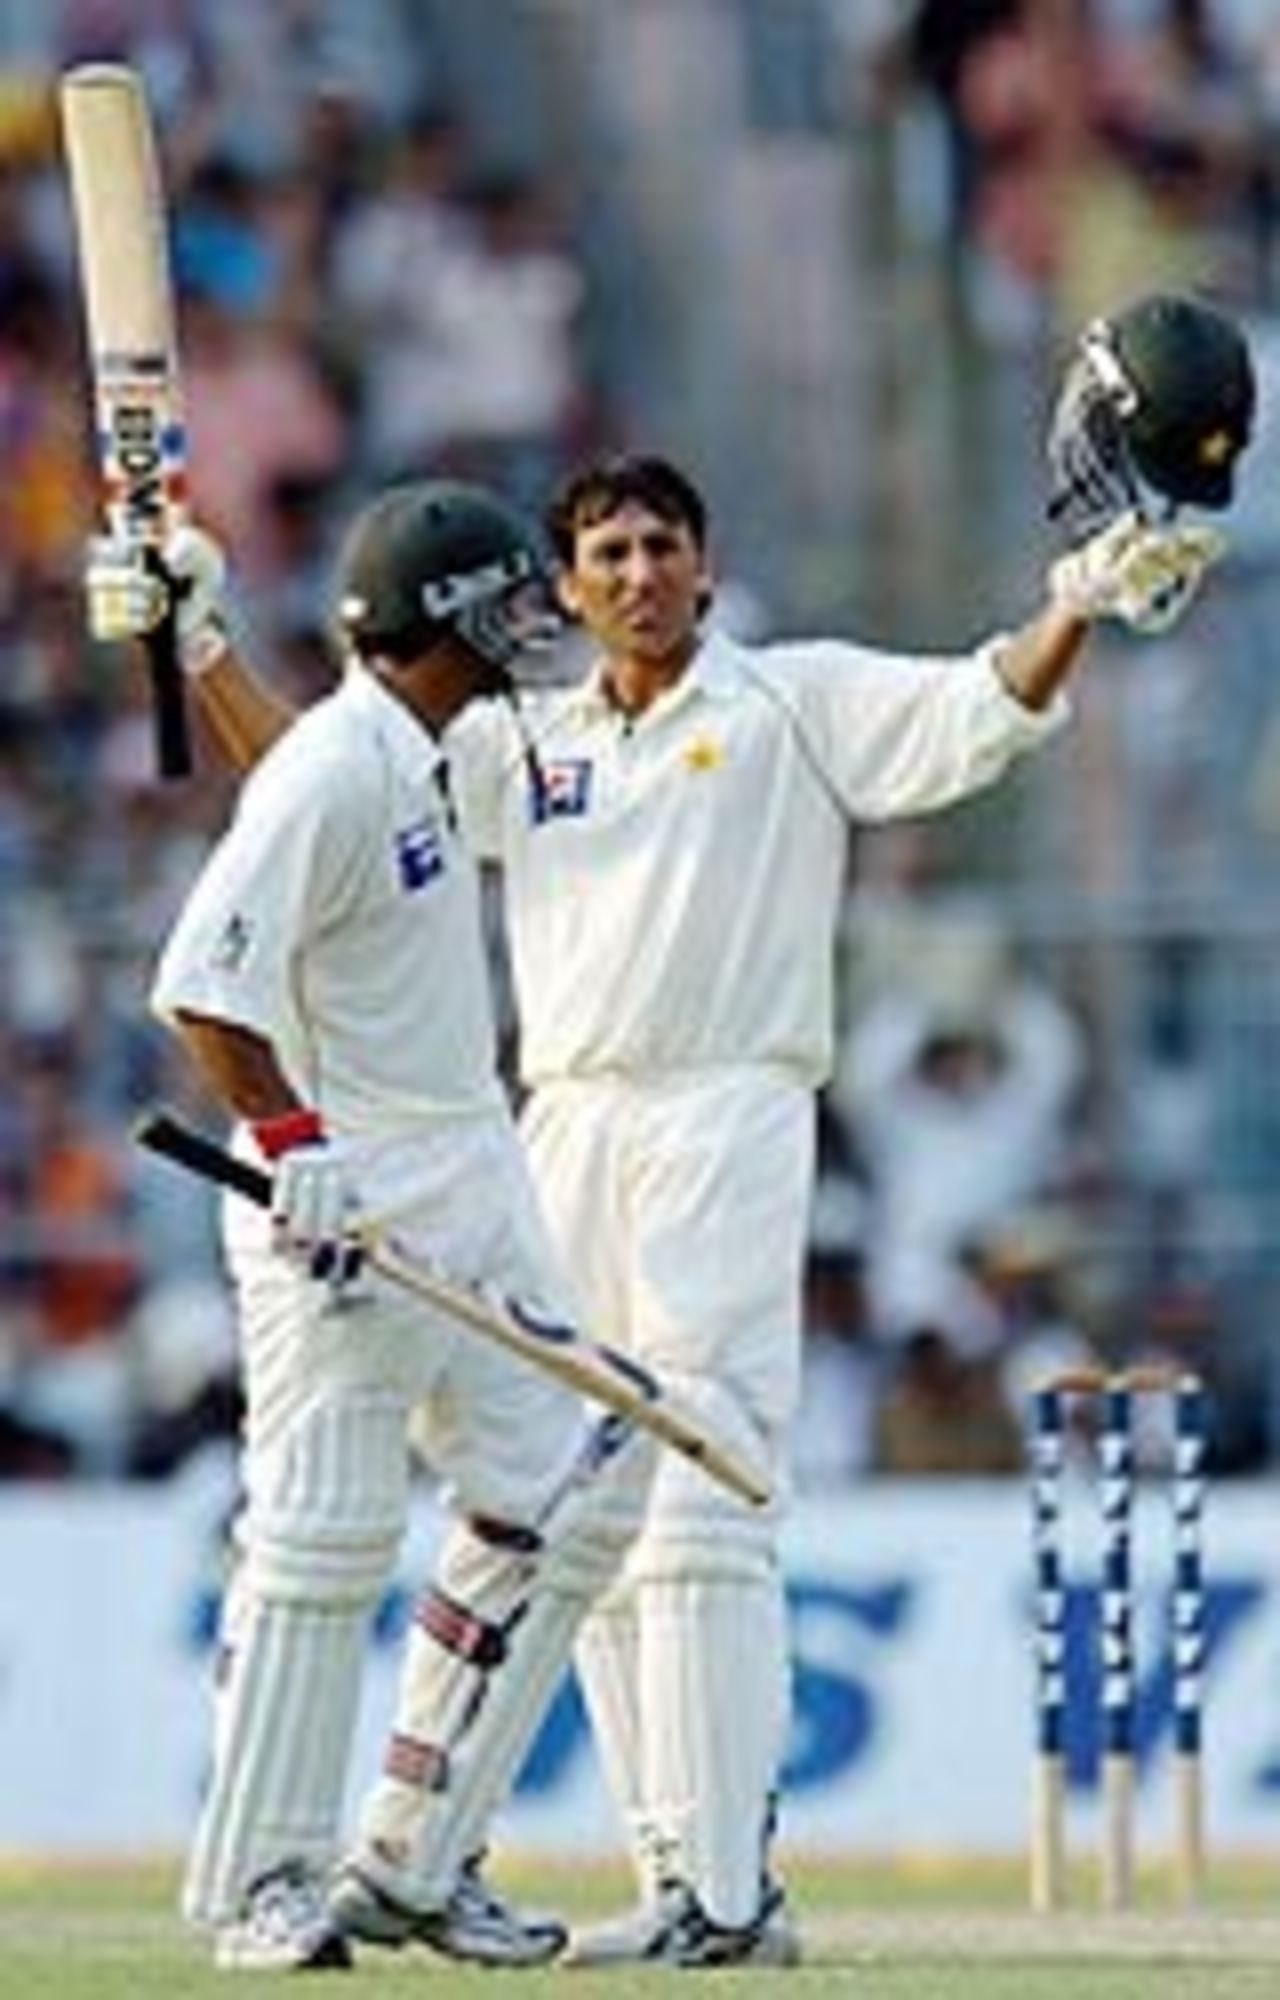 Younis Khan being congratulated by Yousuf Youhana on completing his ton, India v Pakistan, 2nd Test, Kolkata, March 17, 2005